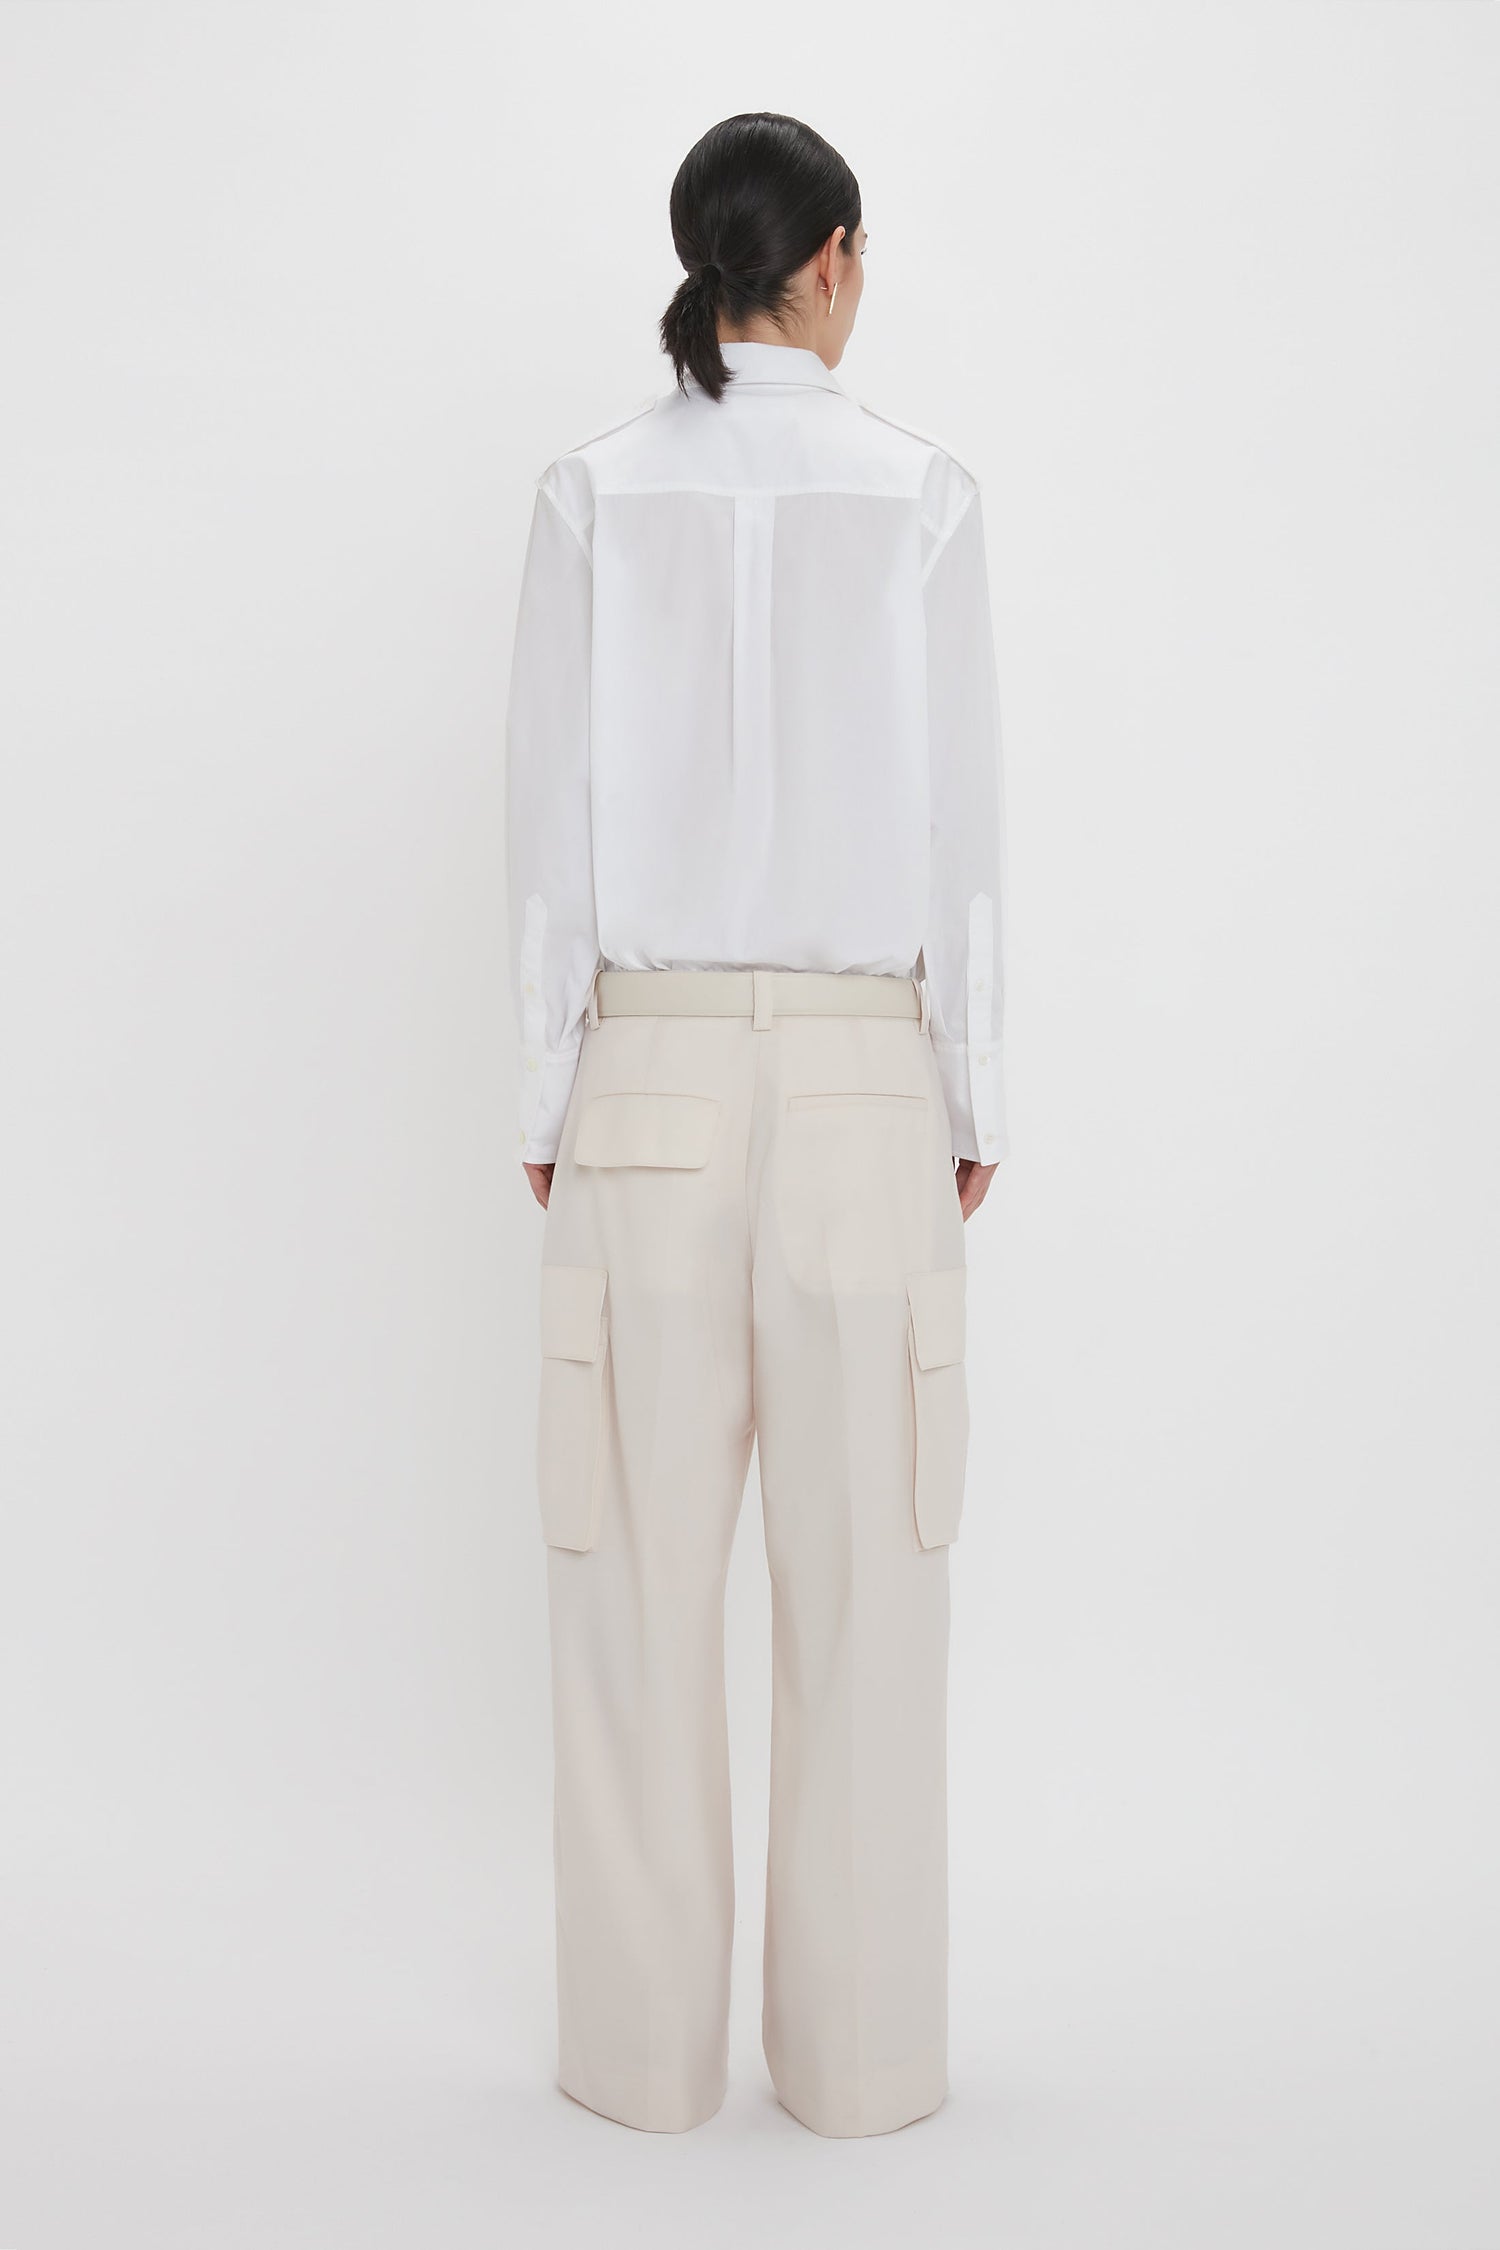 A person with dark hair wearing a white Victoria Beckham Oversized Pocket Shirt In White and cream-colored Relaxed Cargo Trouser stands facing away in a minimalistic setting.